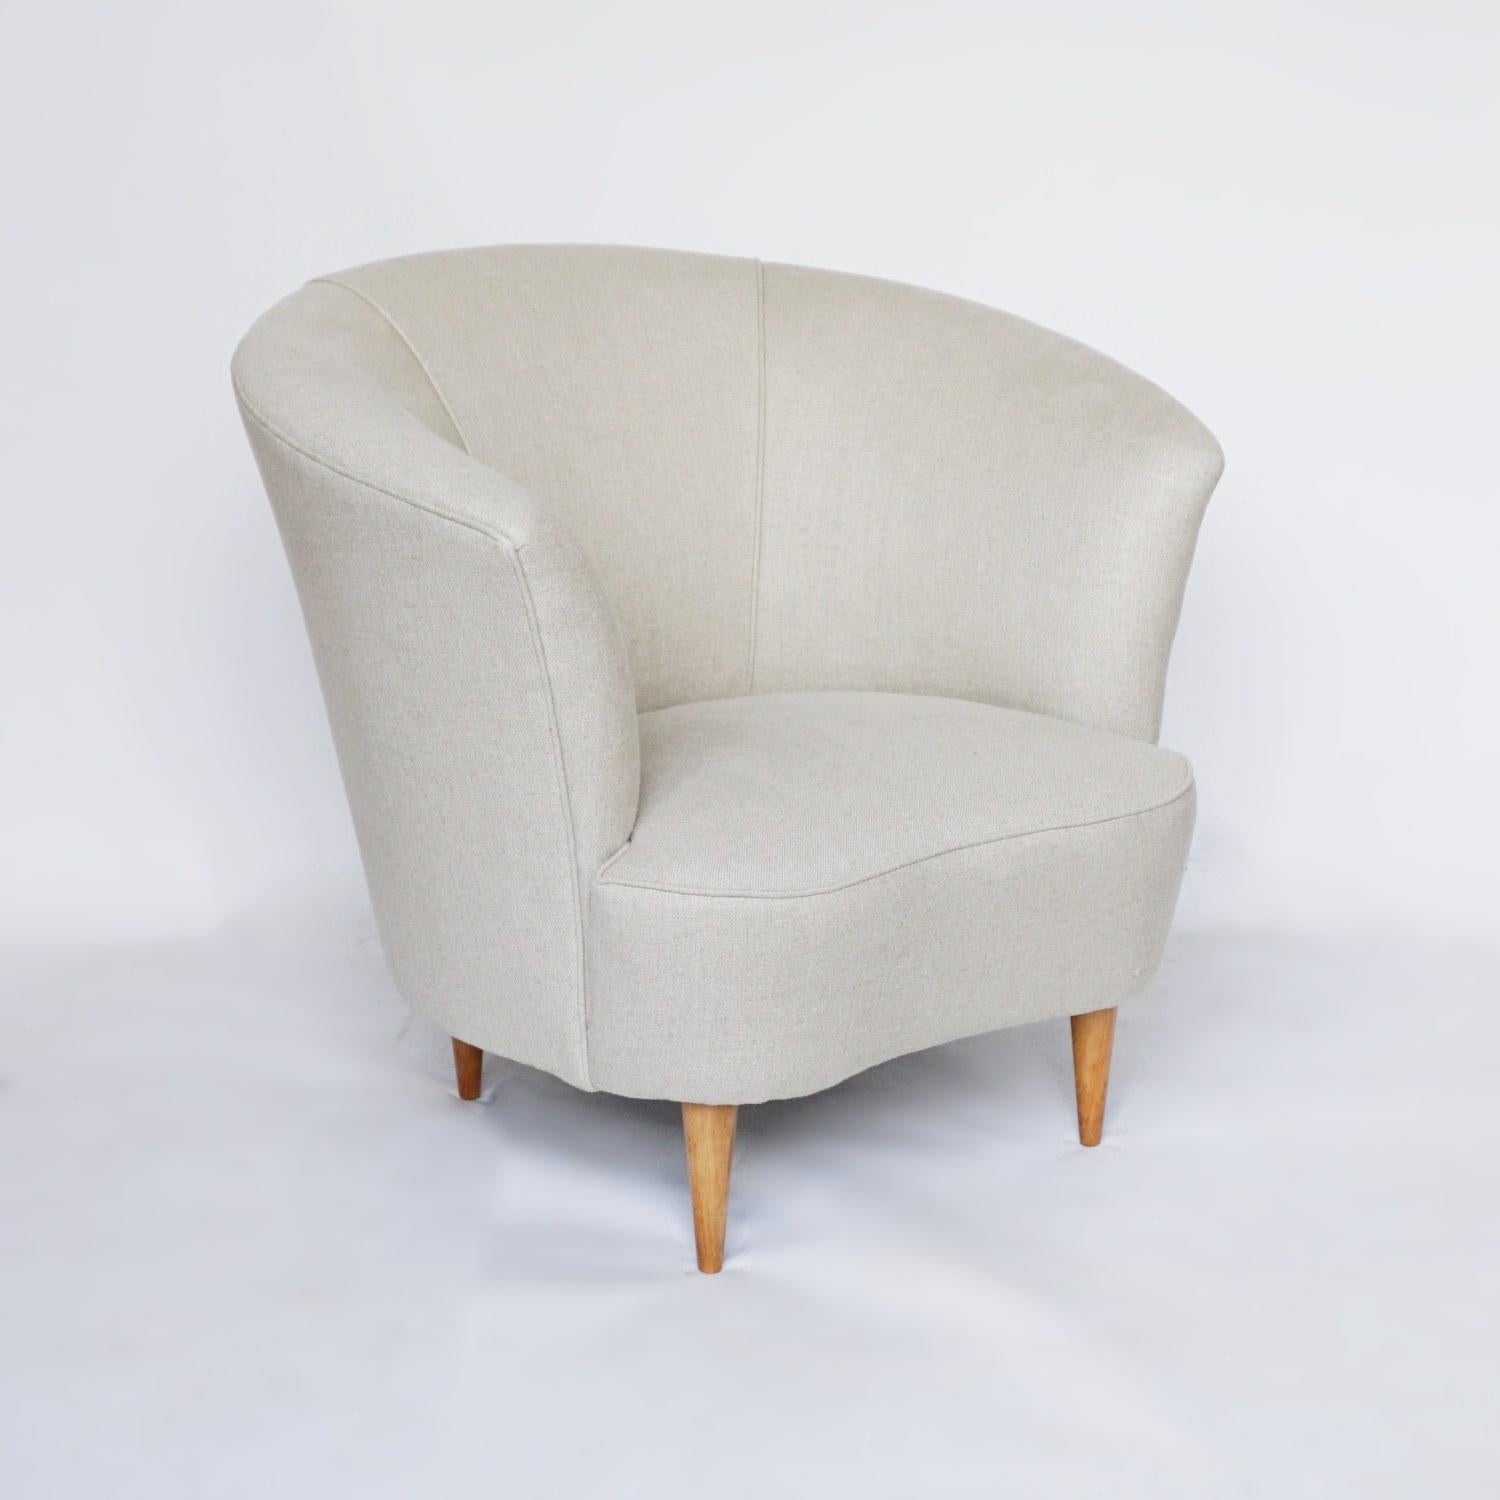 A pair of midcentury tub chairs attributed to Gio Ponti. Re-upholstered in natural linen. Solid Beech legs. 

Dimensions: H 72cm, W 80cm, D 65cm, seat H 34cm, W 45cm, D 46cm 

Origin: Italian 

Date: circa 1950

Item number: 503212

All of